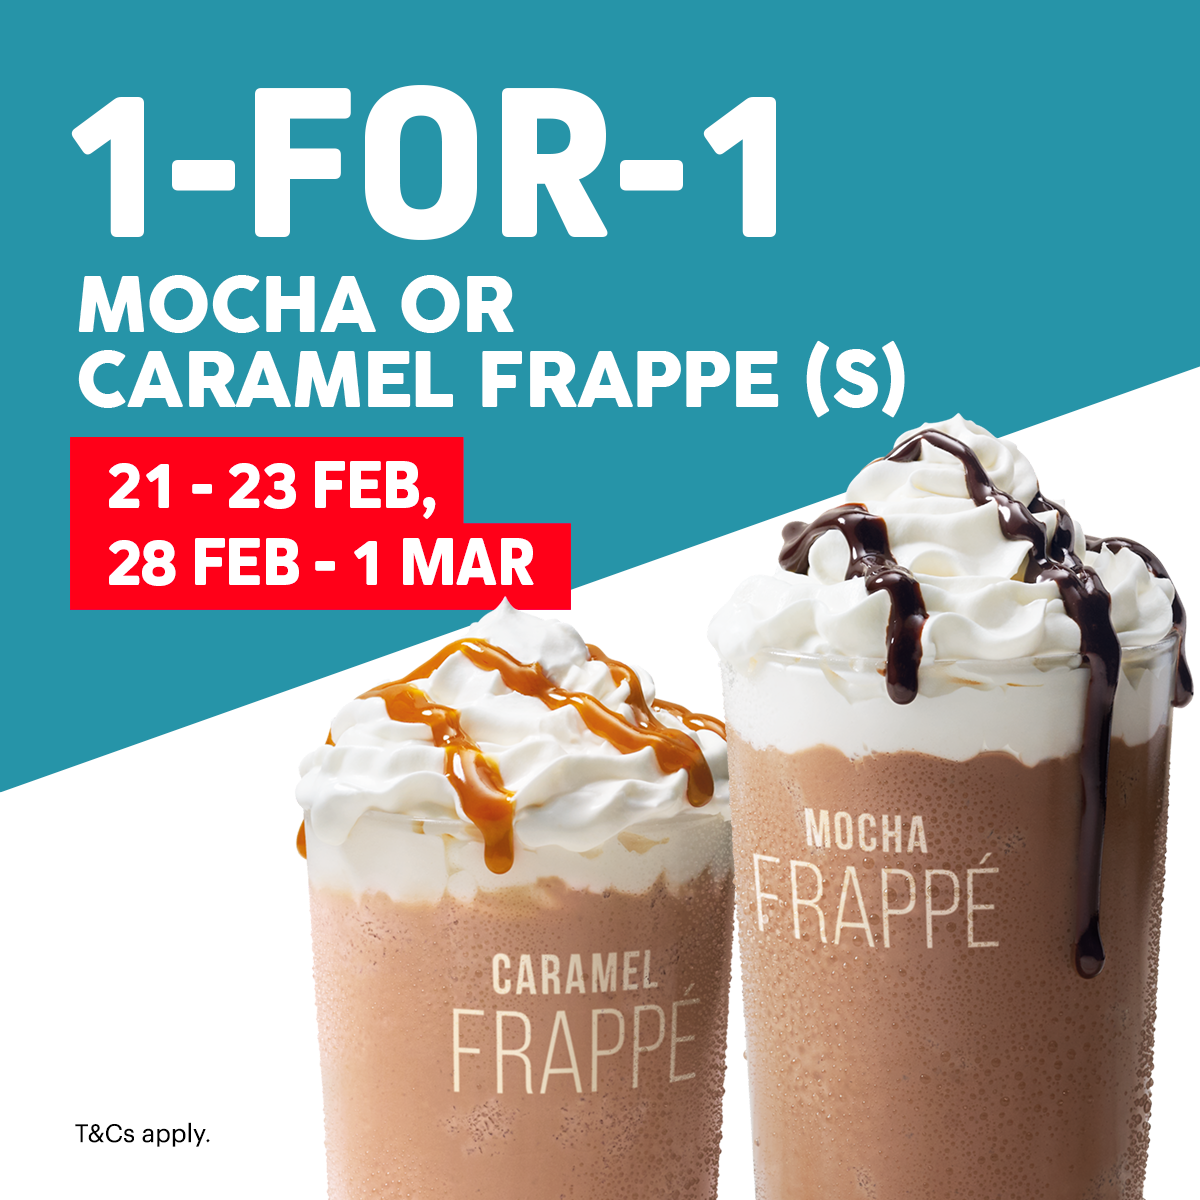 McDonald’s Offering 1for1 Mocha/Caramel Frappe From 21 To 23 Feb 20